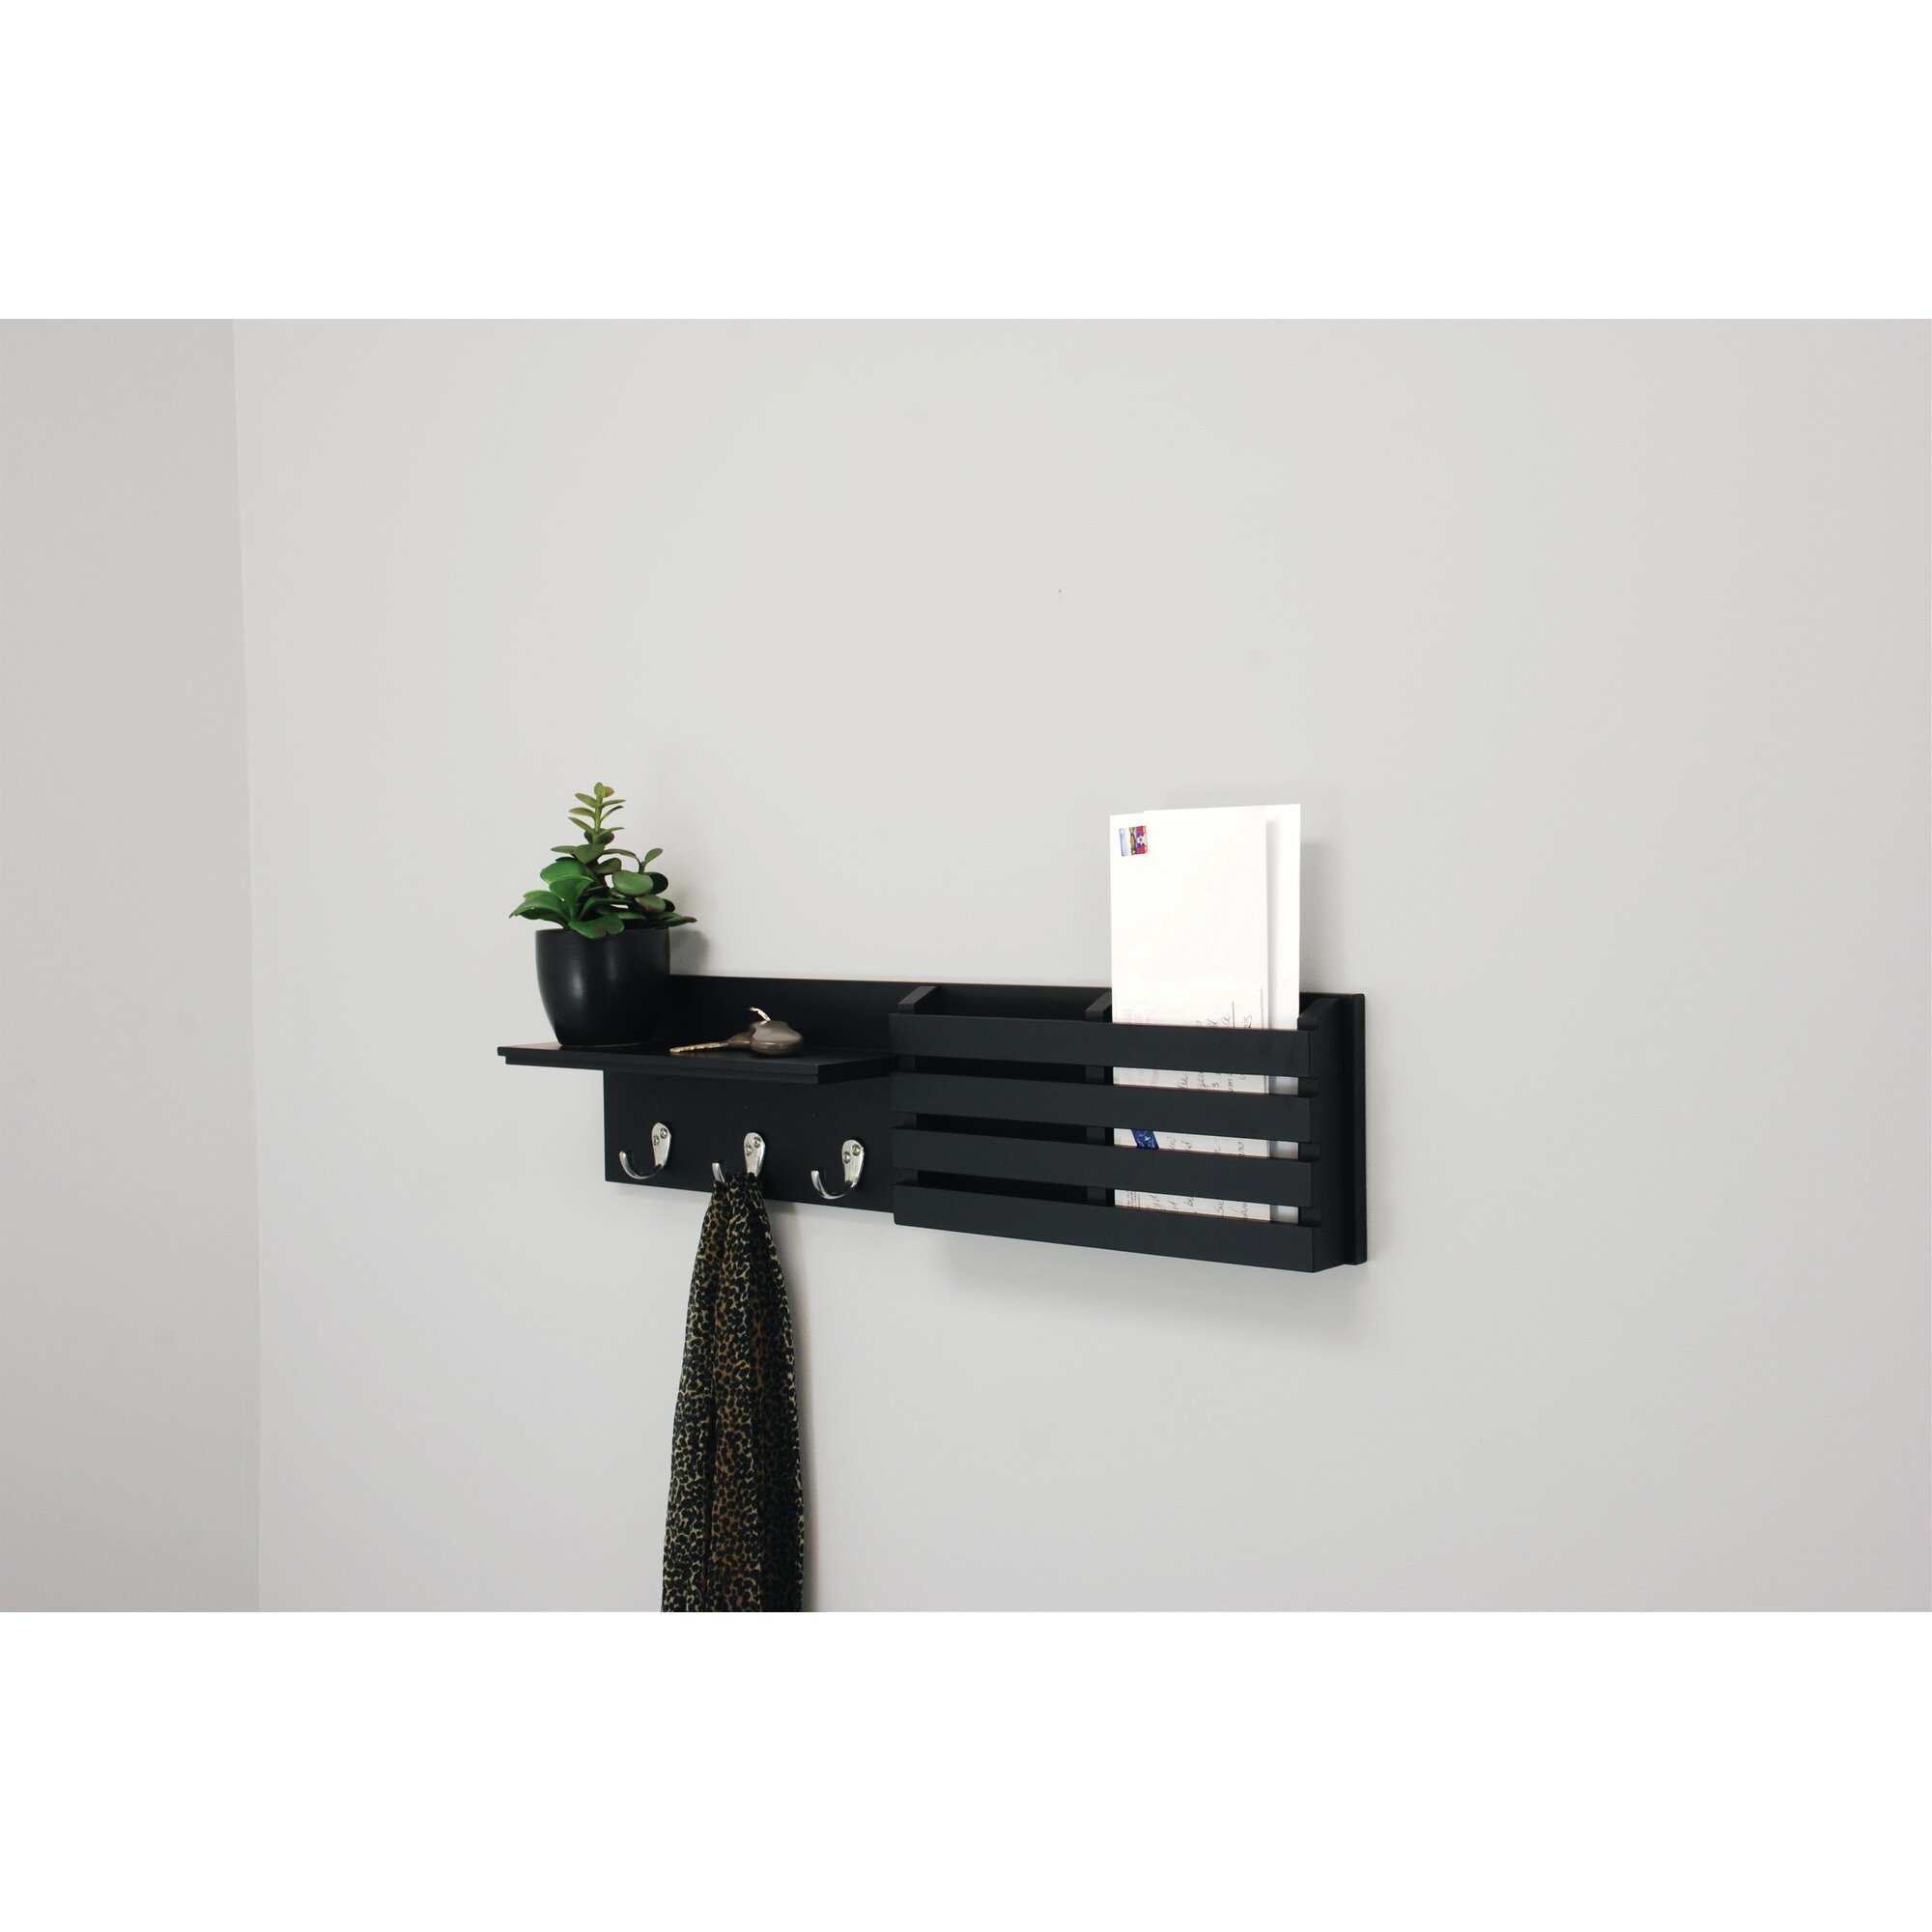 nexxt Design Sydney Wall Shelf and Mail Holder &amp; Reviews ...